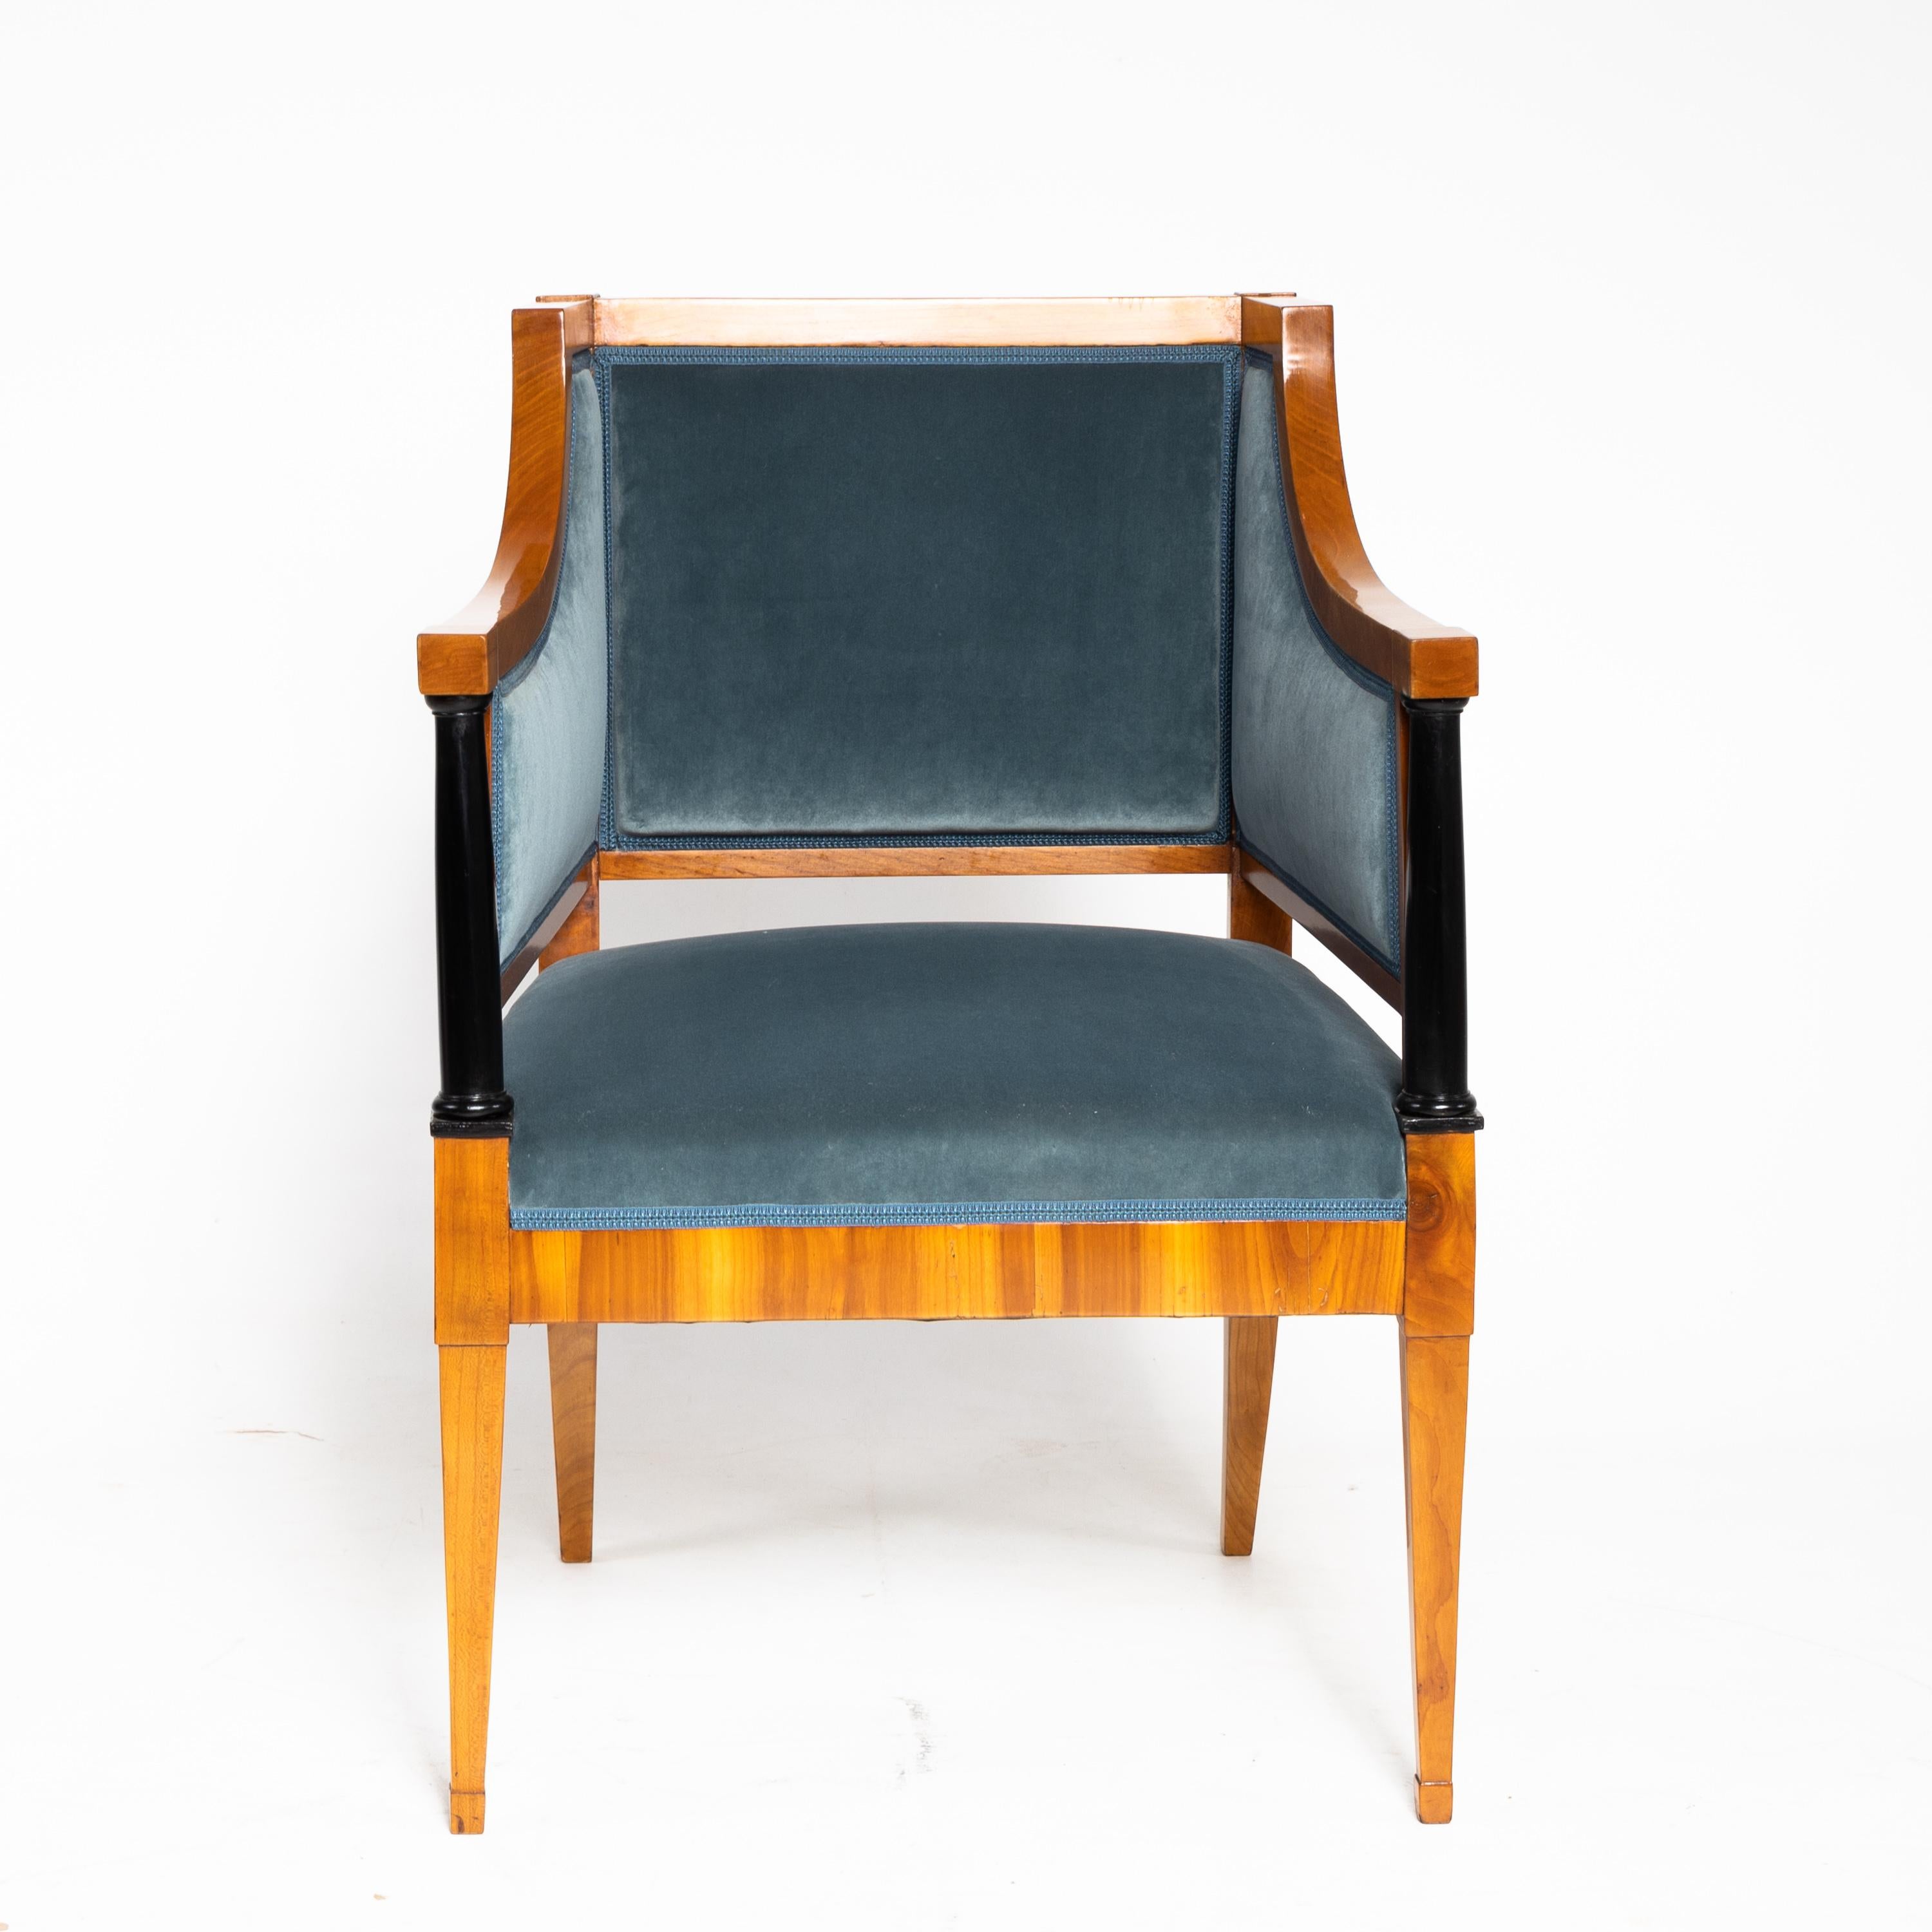 Biedermeier armchair on square pointed feet at the front and slightly flared sabre legs at the back. The armrests start at the same height as the straight backrest and then lower themselves onto ebonized full columns. The armchair is veneered in